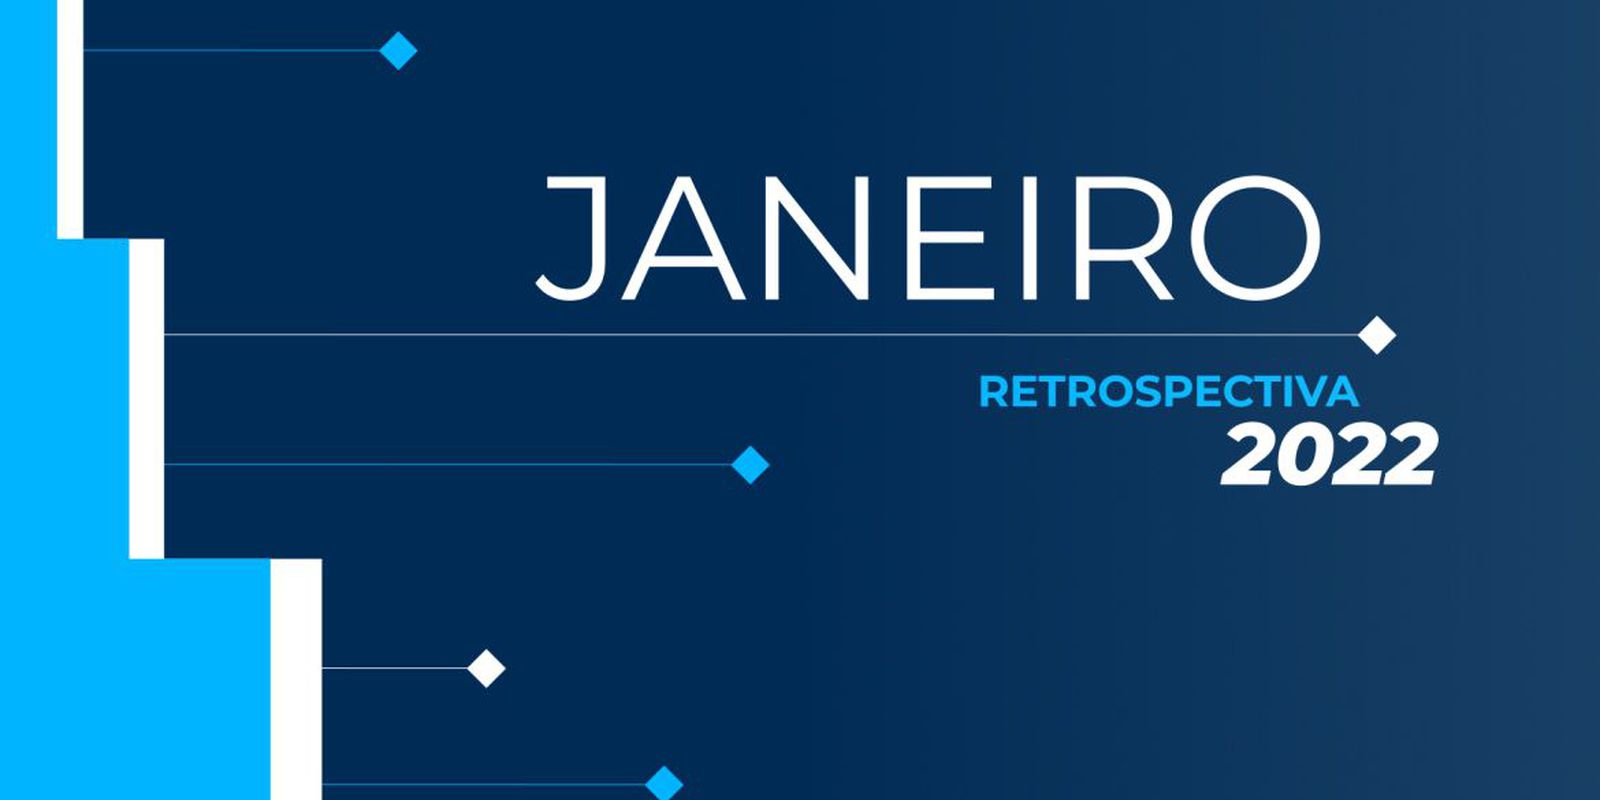 Retrospective 2022: check out the main news of January